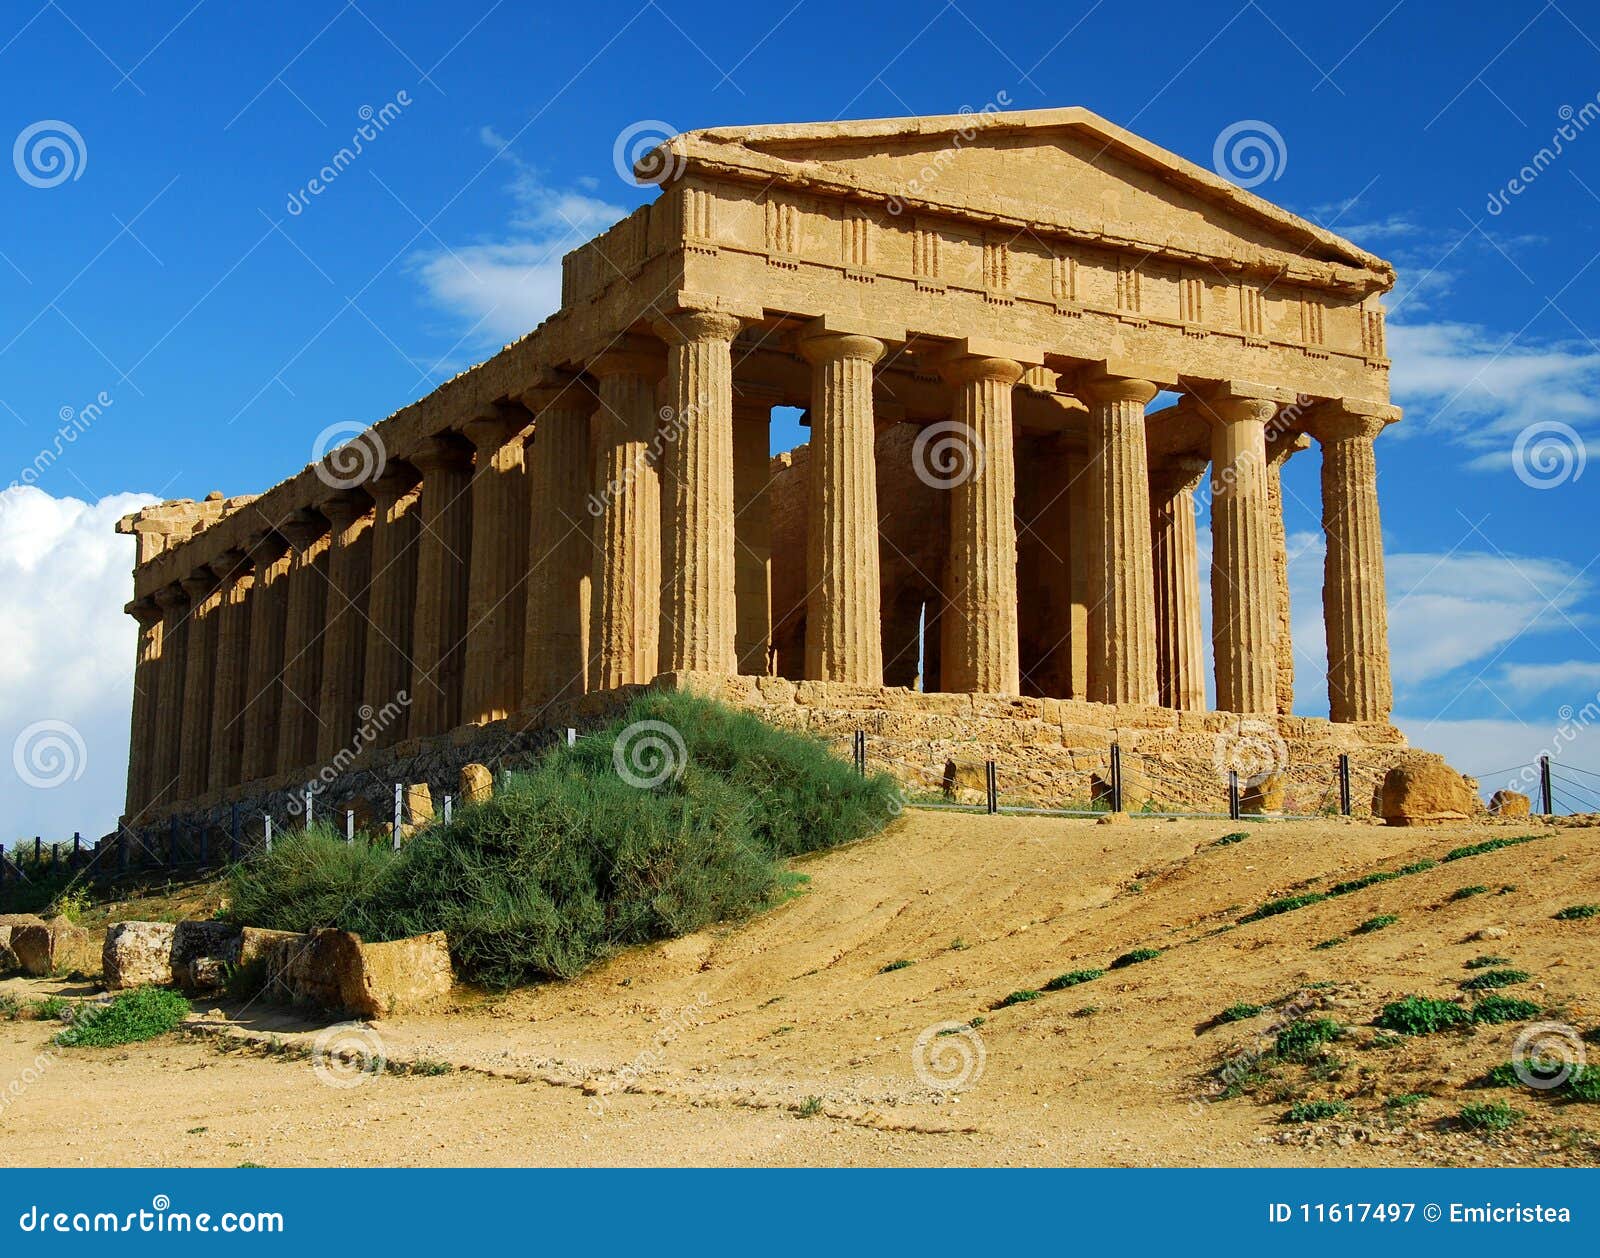 greek temple in agrigento / sicily